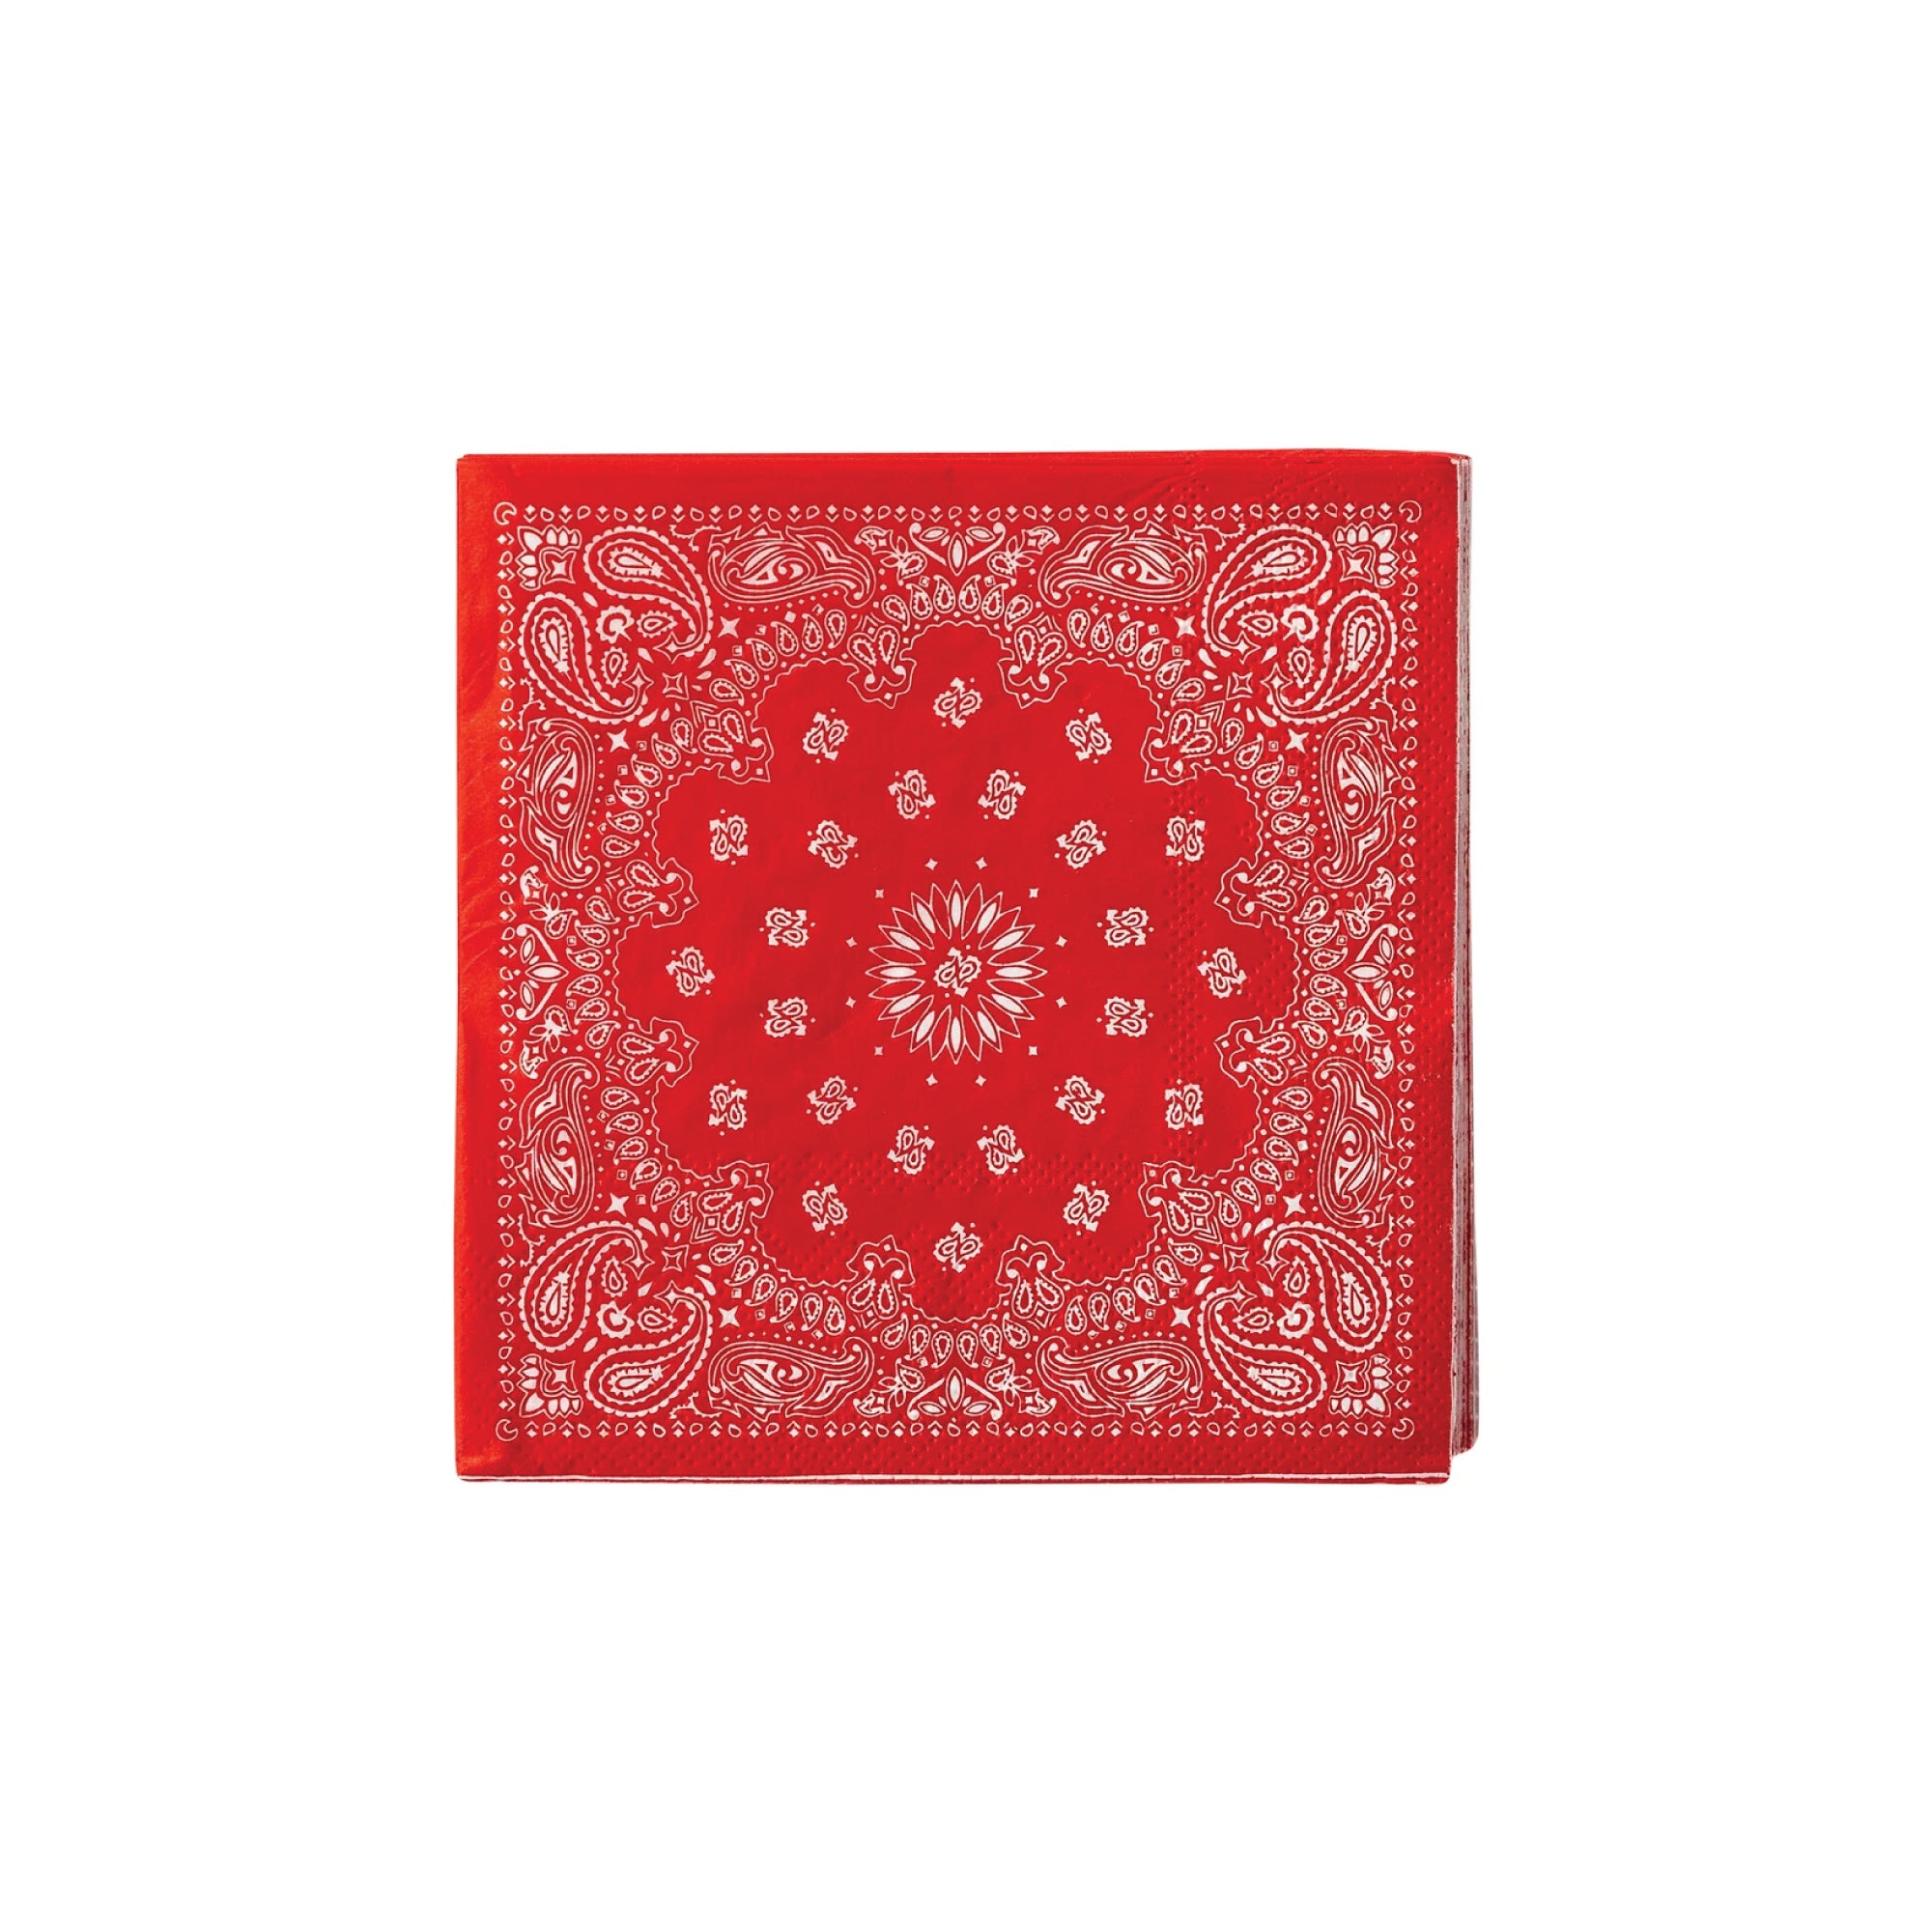 Red & Blue Bandana Dessert Napkins 24ct | The Party Darling